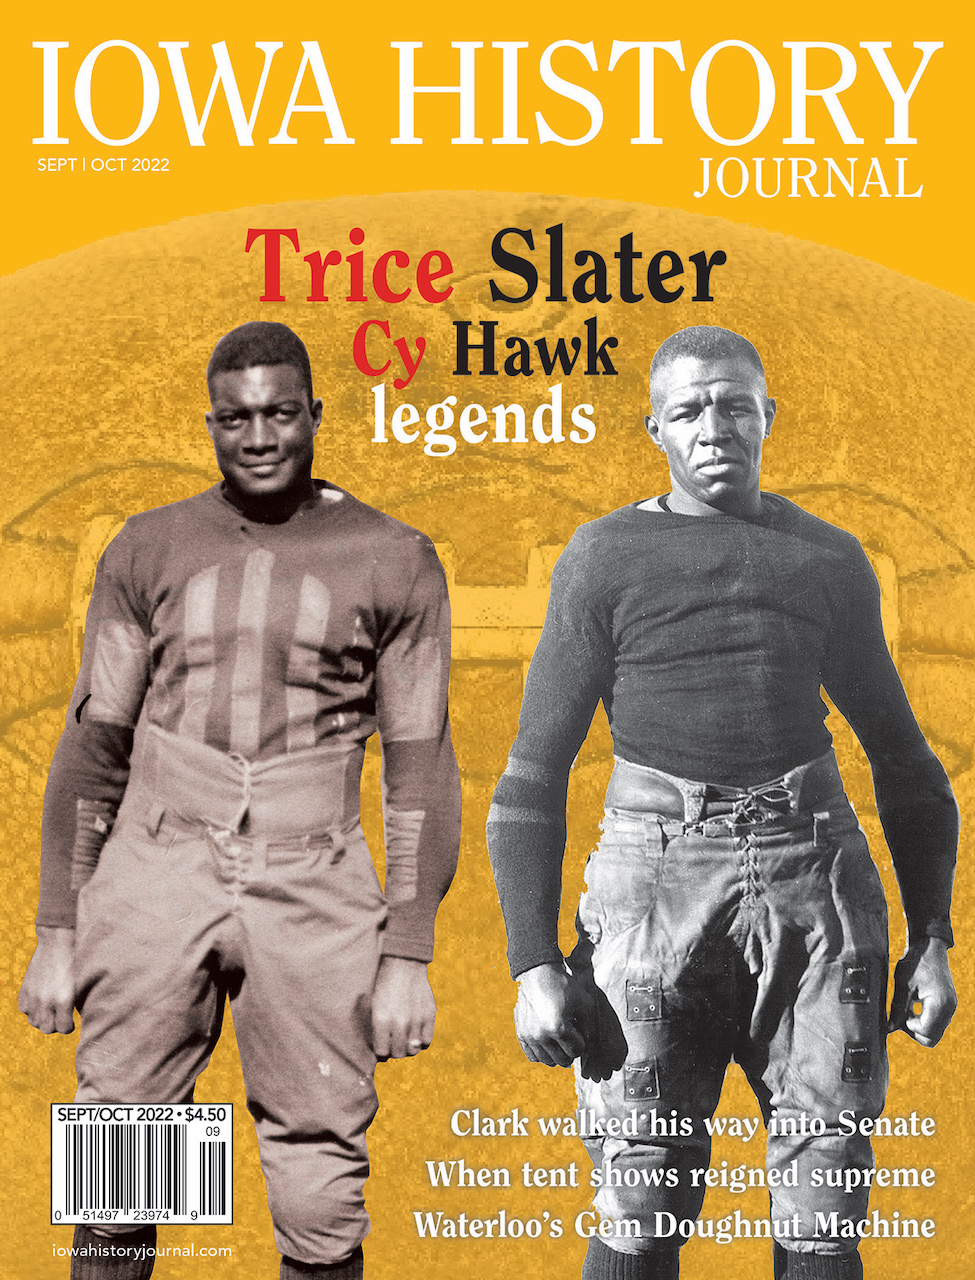 Volume 14, Issue 5 - Trice Slater Cy Hawk Legends